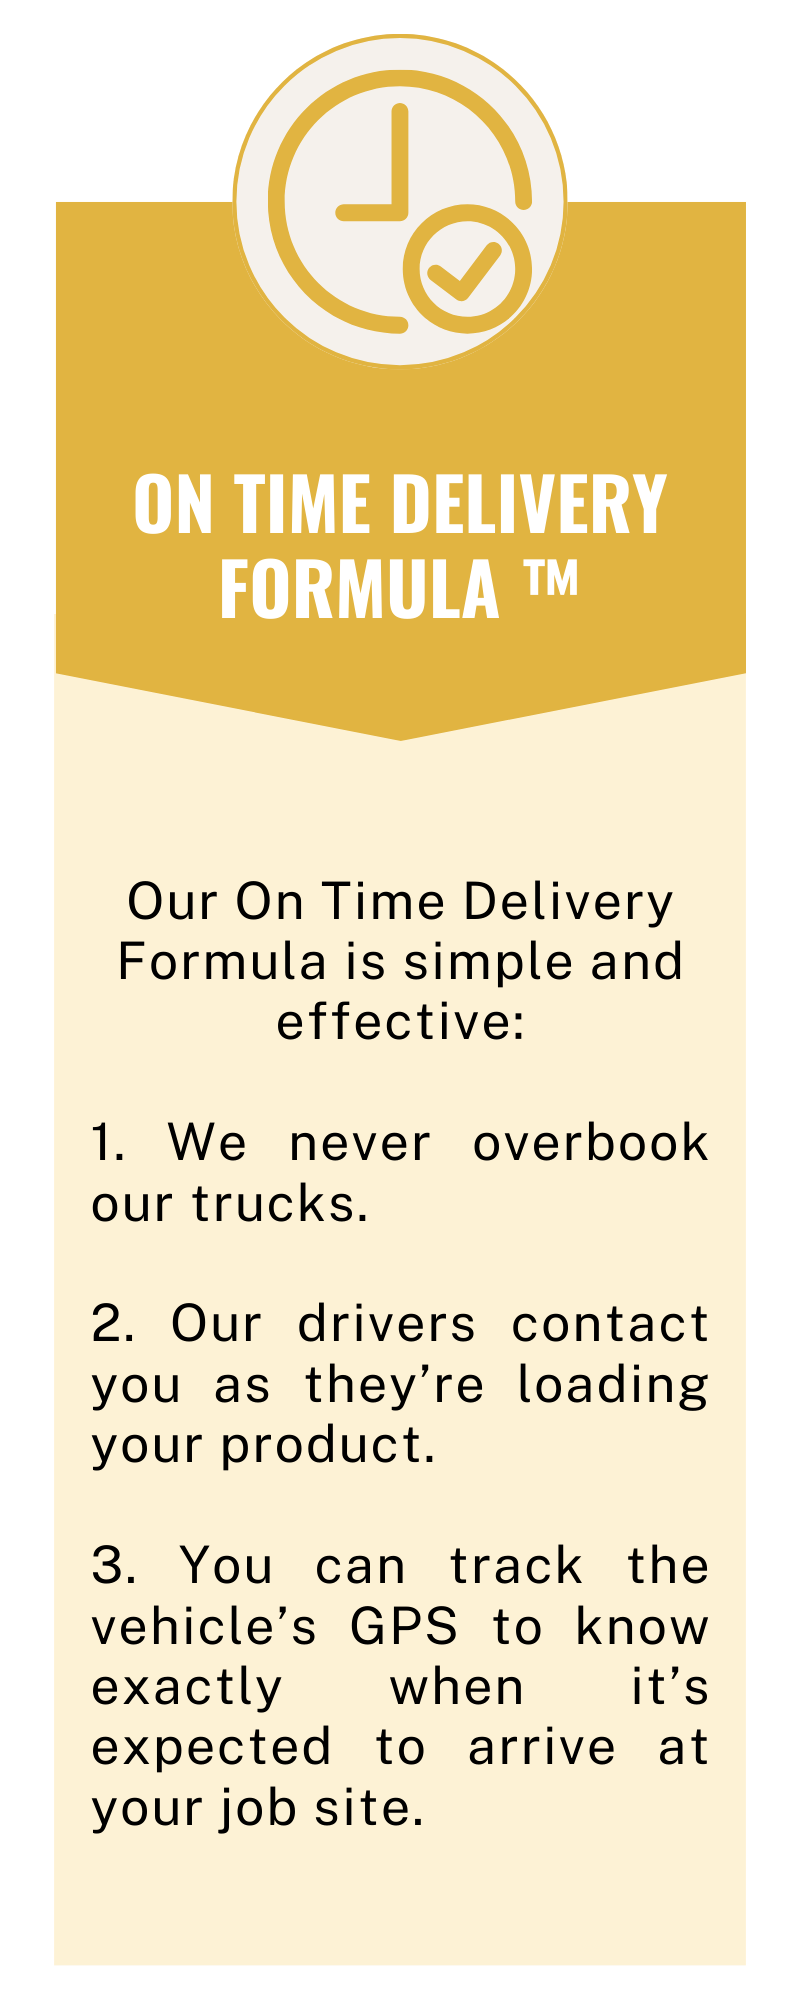 On-time Delivery Formula